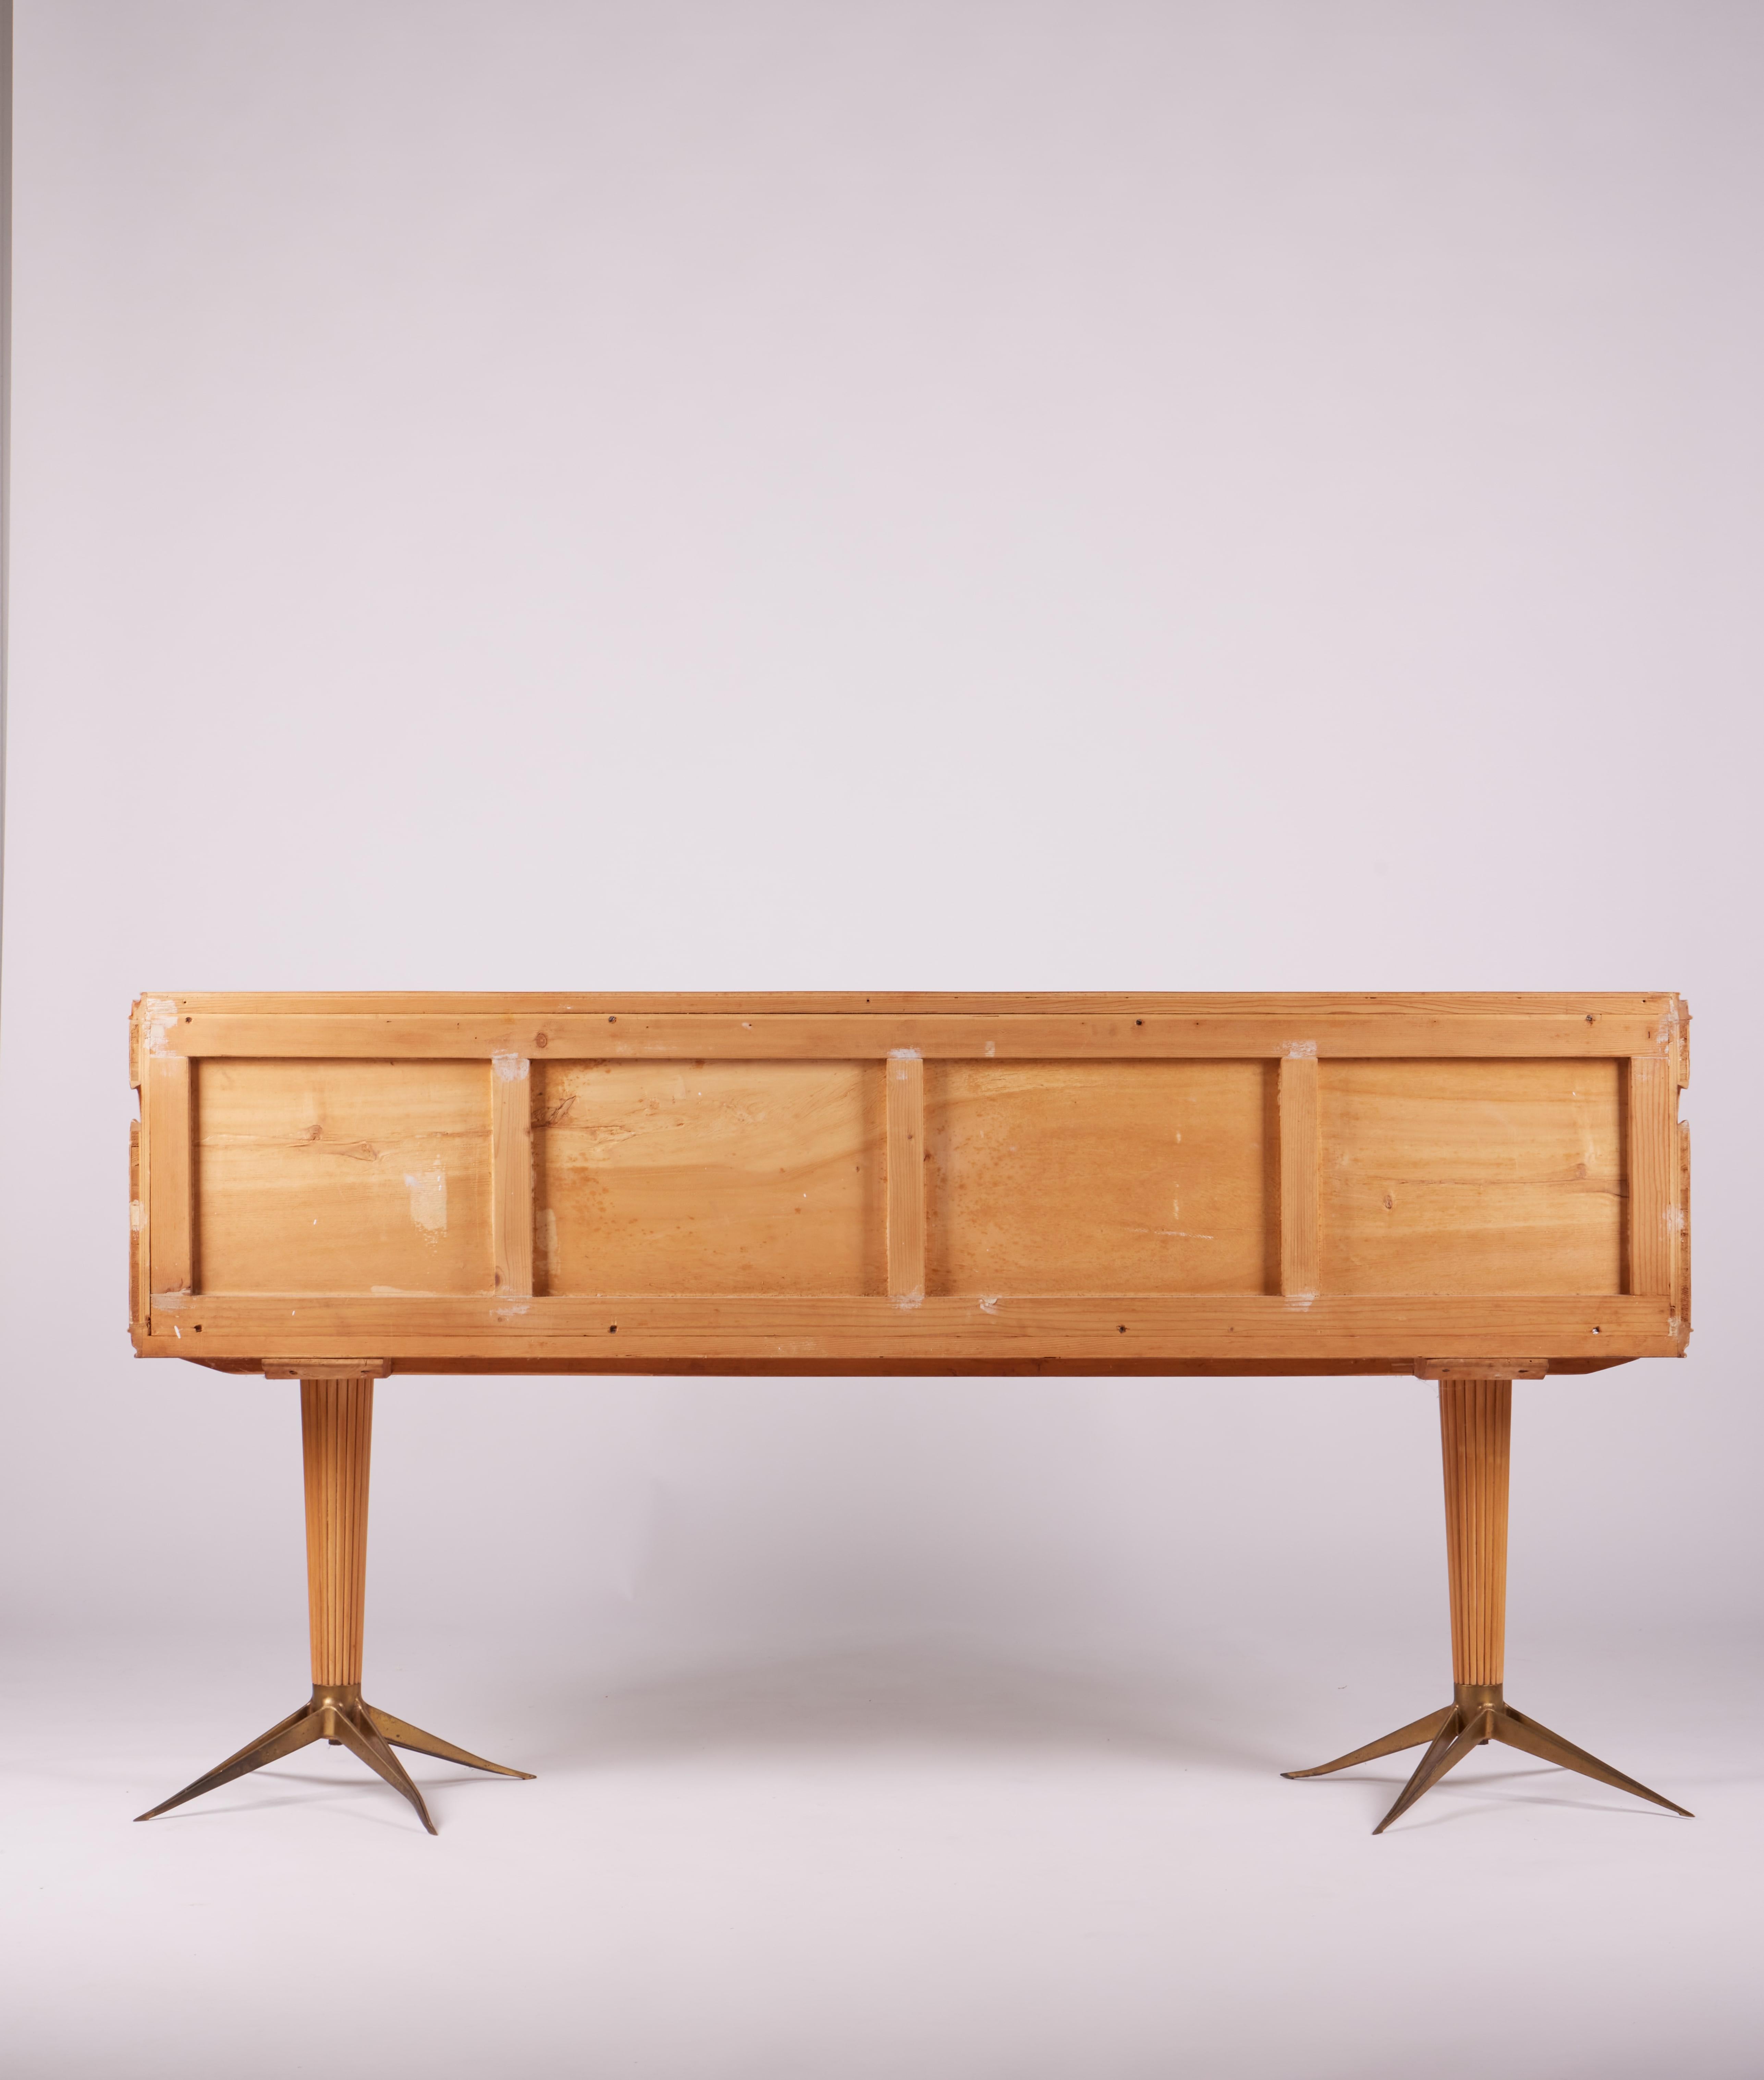 Italian Midcentury Parchment and Walnut Sideboard with Brass Legs, 1940s For Sale 1